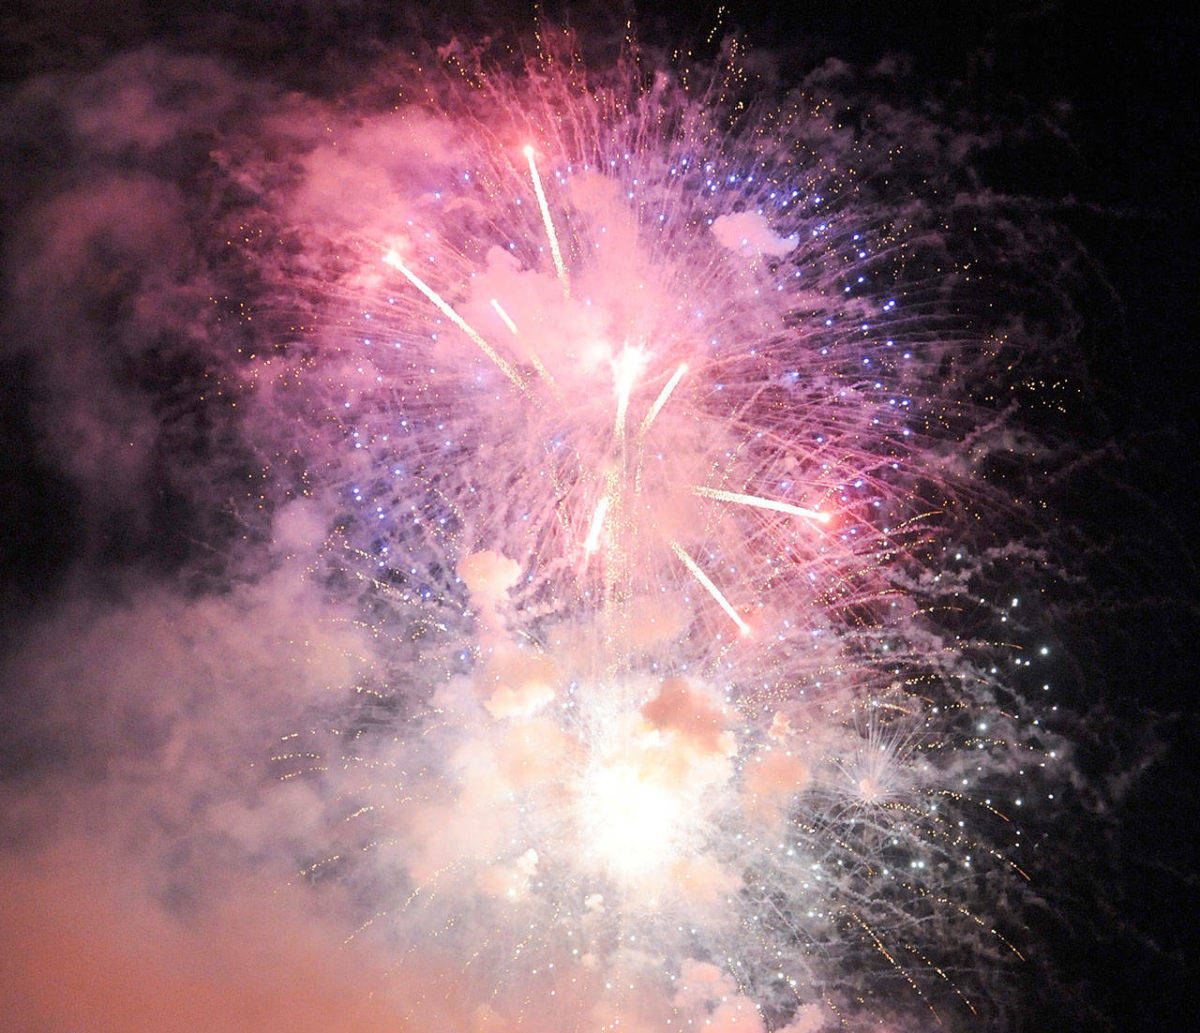 Fireworks could be coming next Independence Day in Sequim depending on proposals tentatively coming to Sequim city councilors. Sequim hosts fireworks each May for the Sequim Irrigation Festival Logging Show, as seen here in 2019. Sequim Gazette file photo by Michael Dashiell